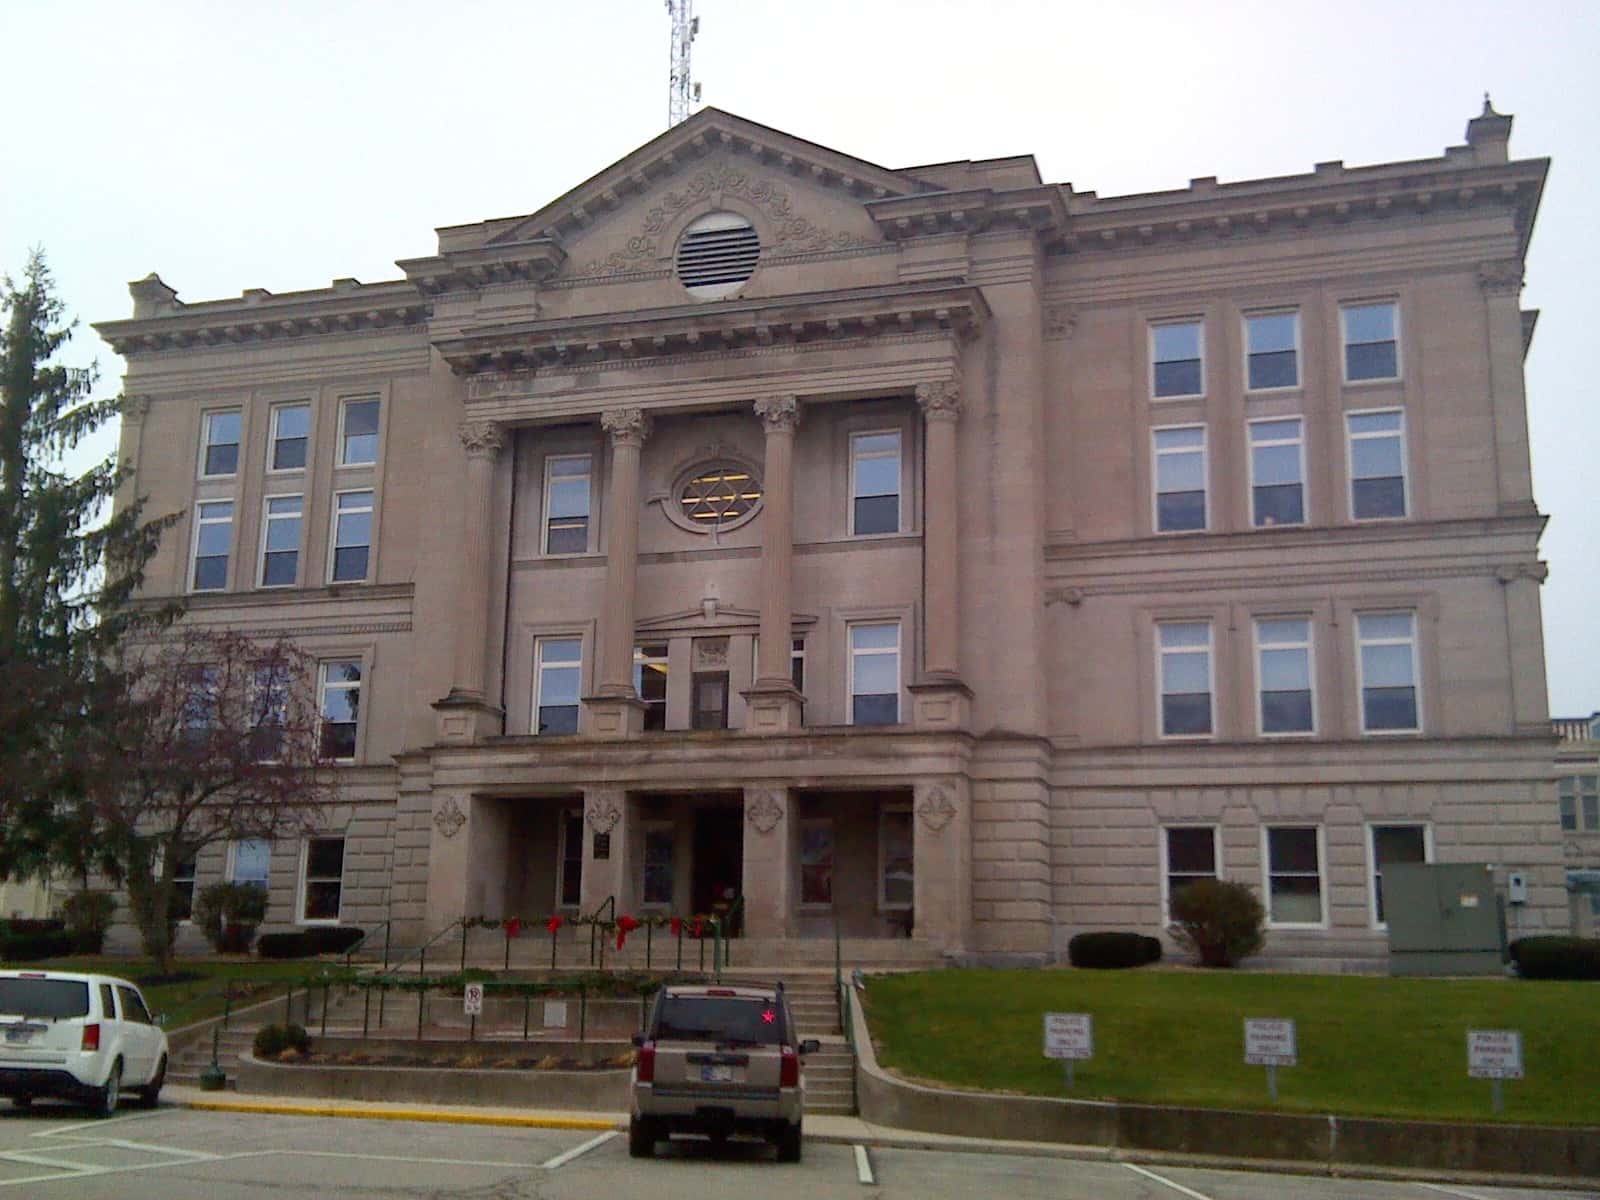 Putnam County Courthouse